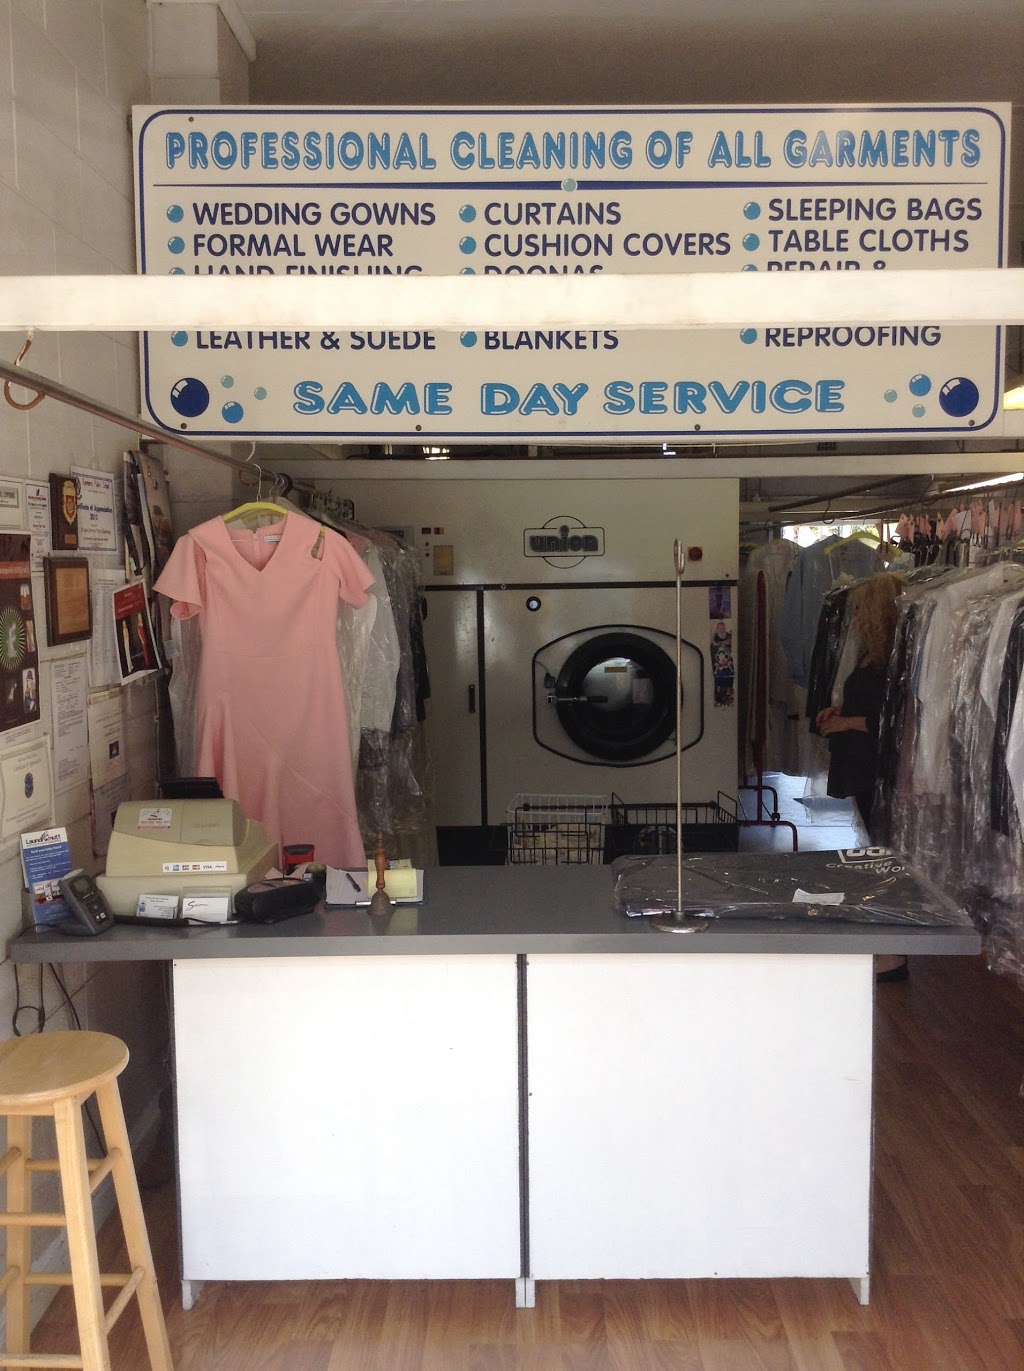 AT Your Service DRY Cleaning | 71 Sorlie Rd, Frenchs Forest NSW 2086, Australia | Phone: (02) 9452 4520